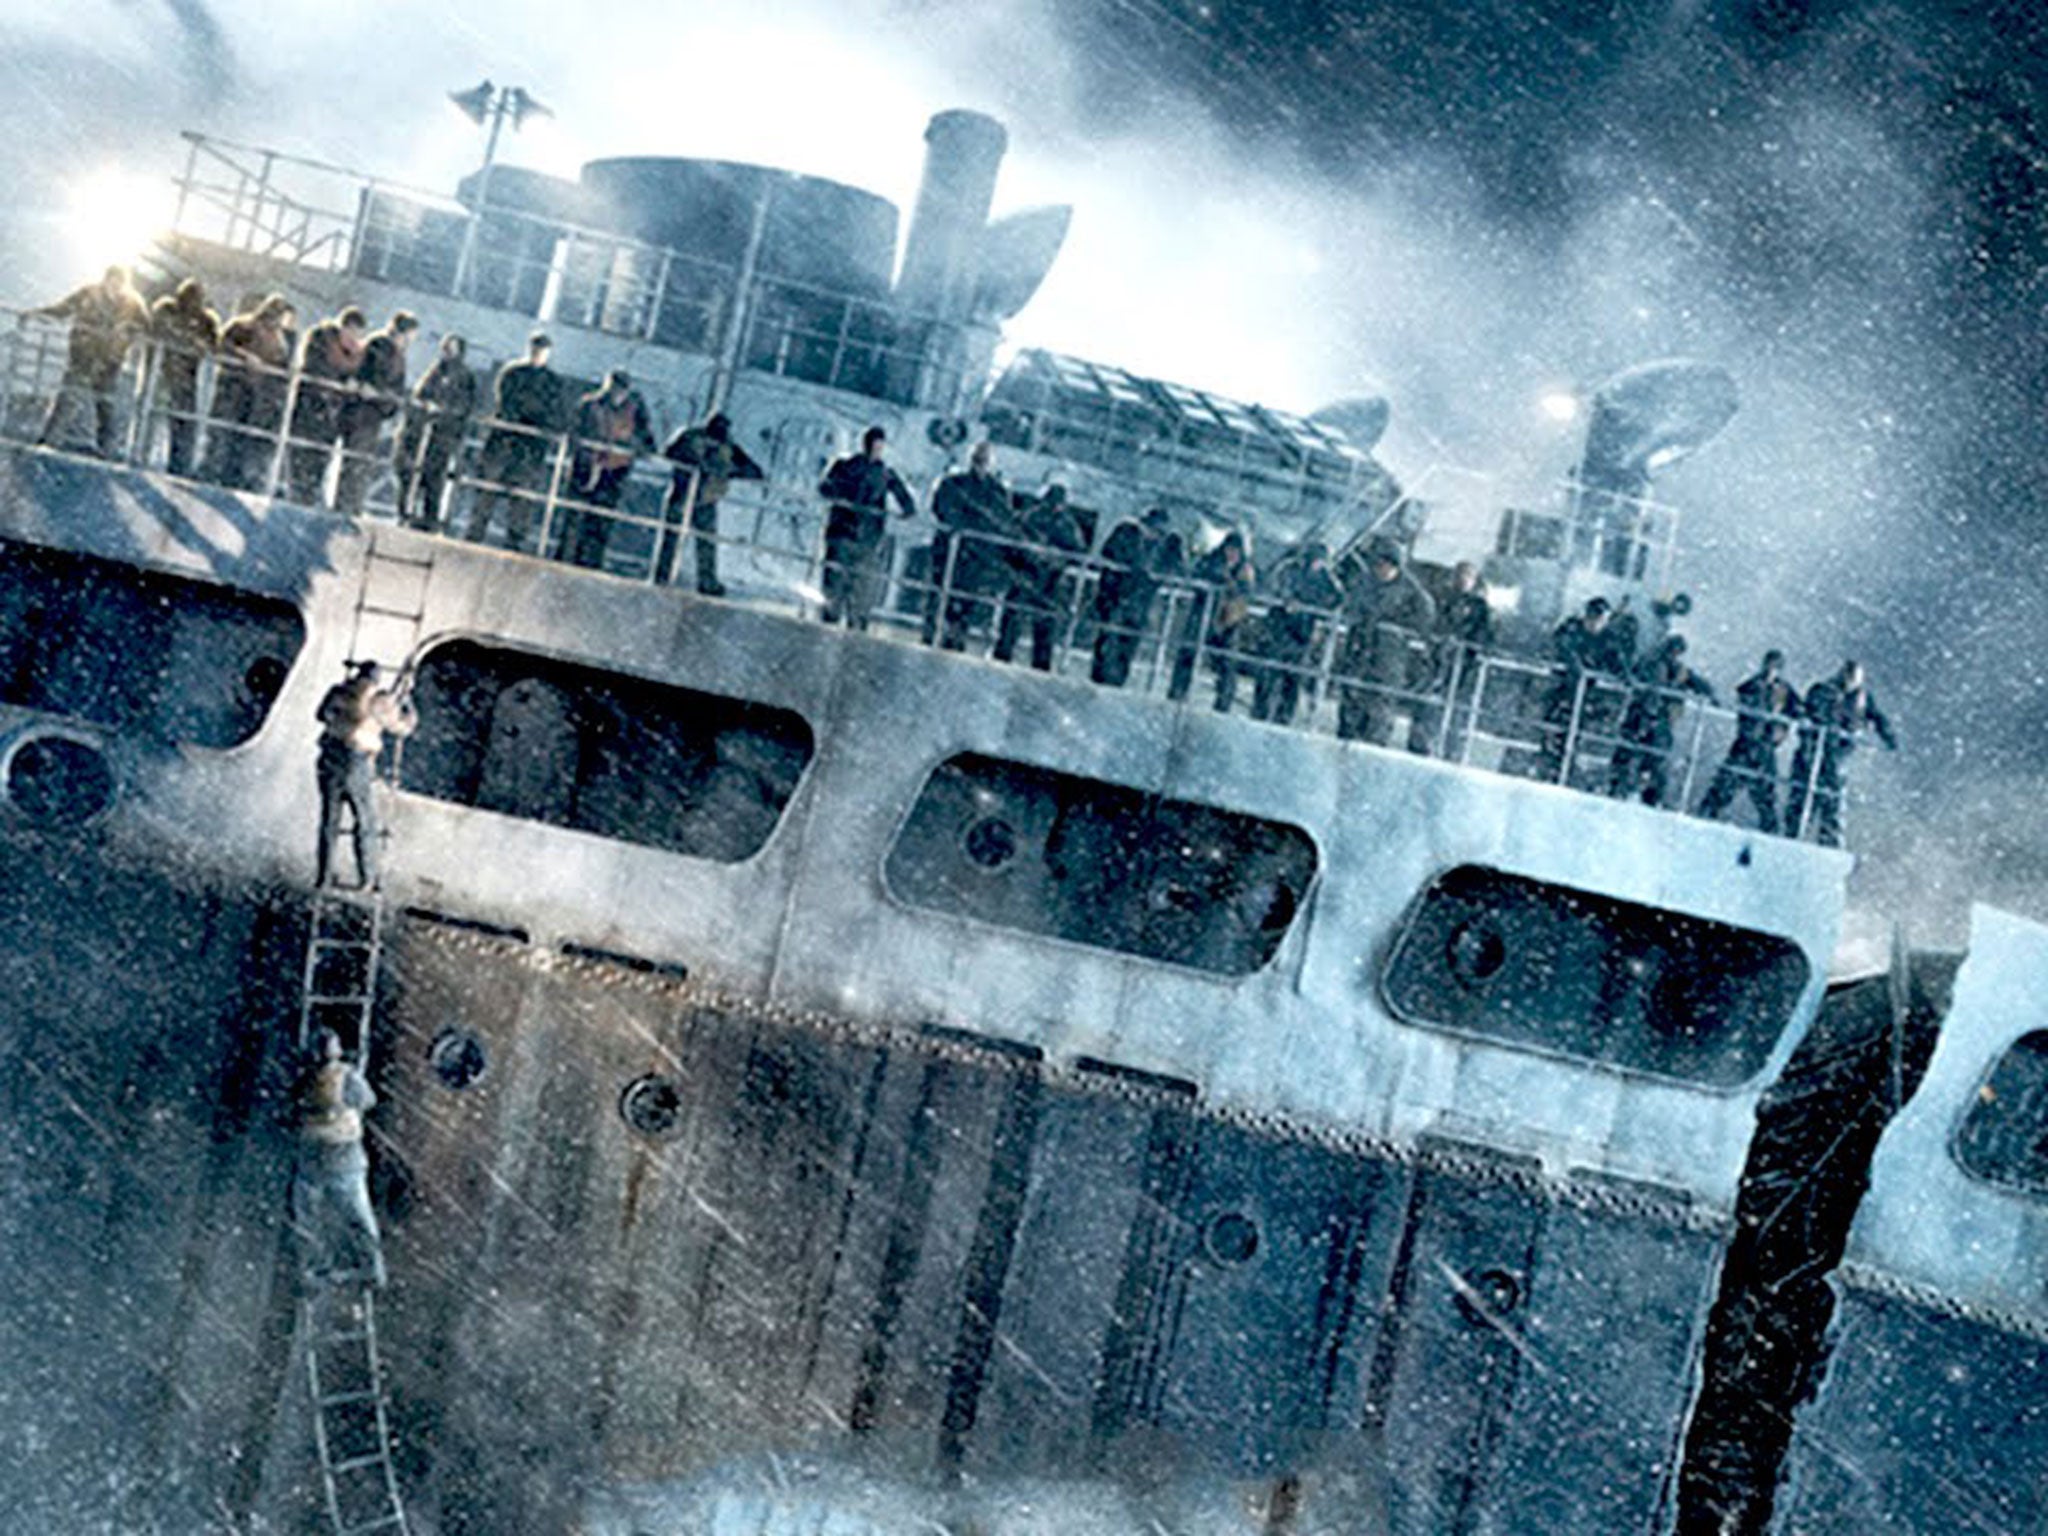 Perfect storm: Craig Gillespie’s well-crafted ‘The Finest Hours’